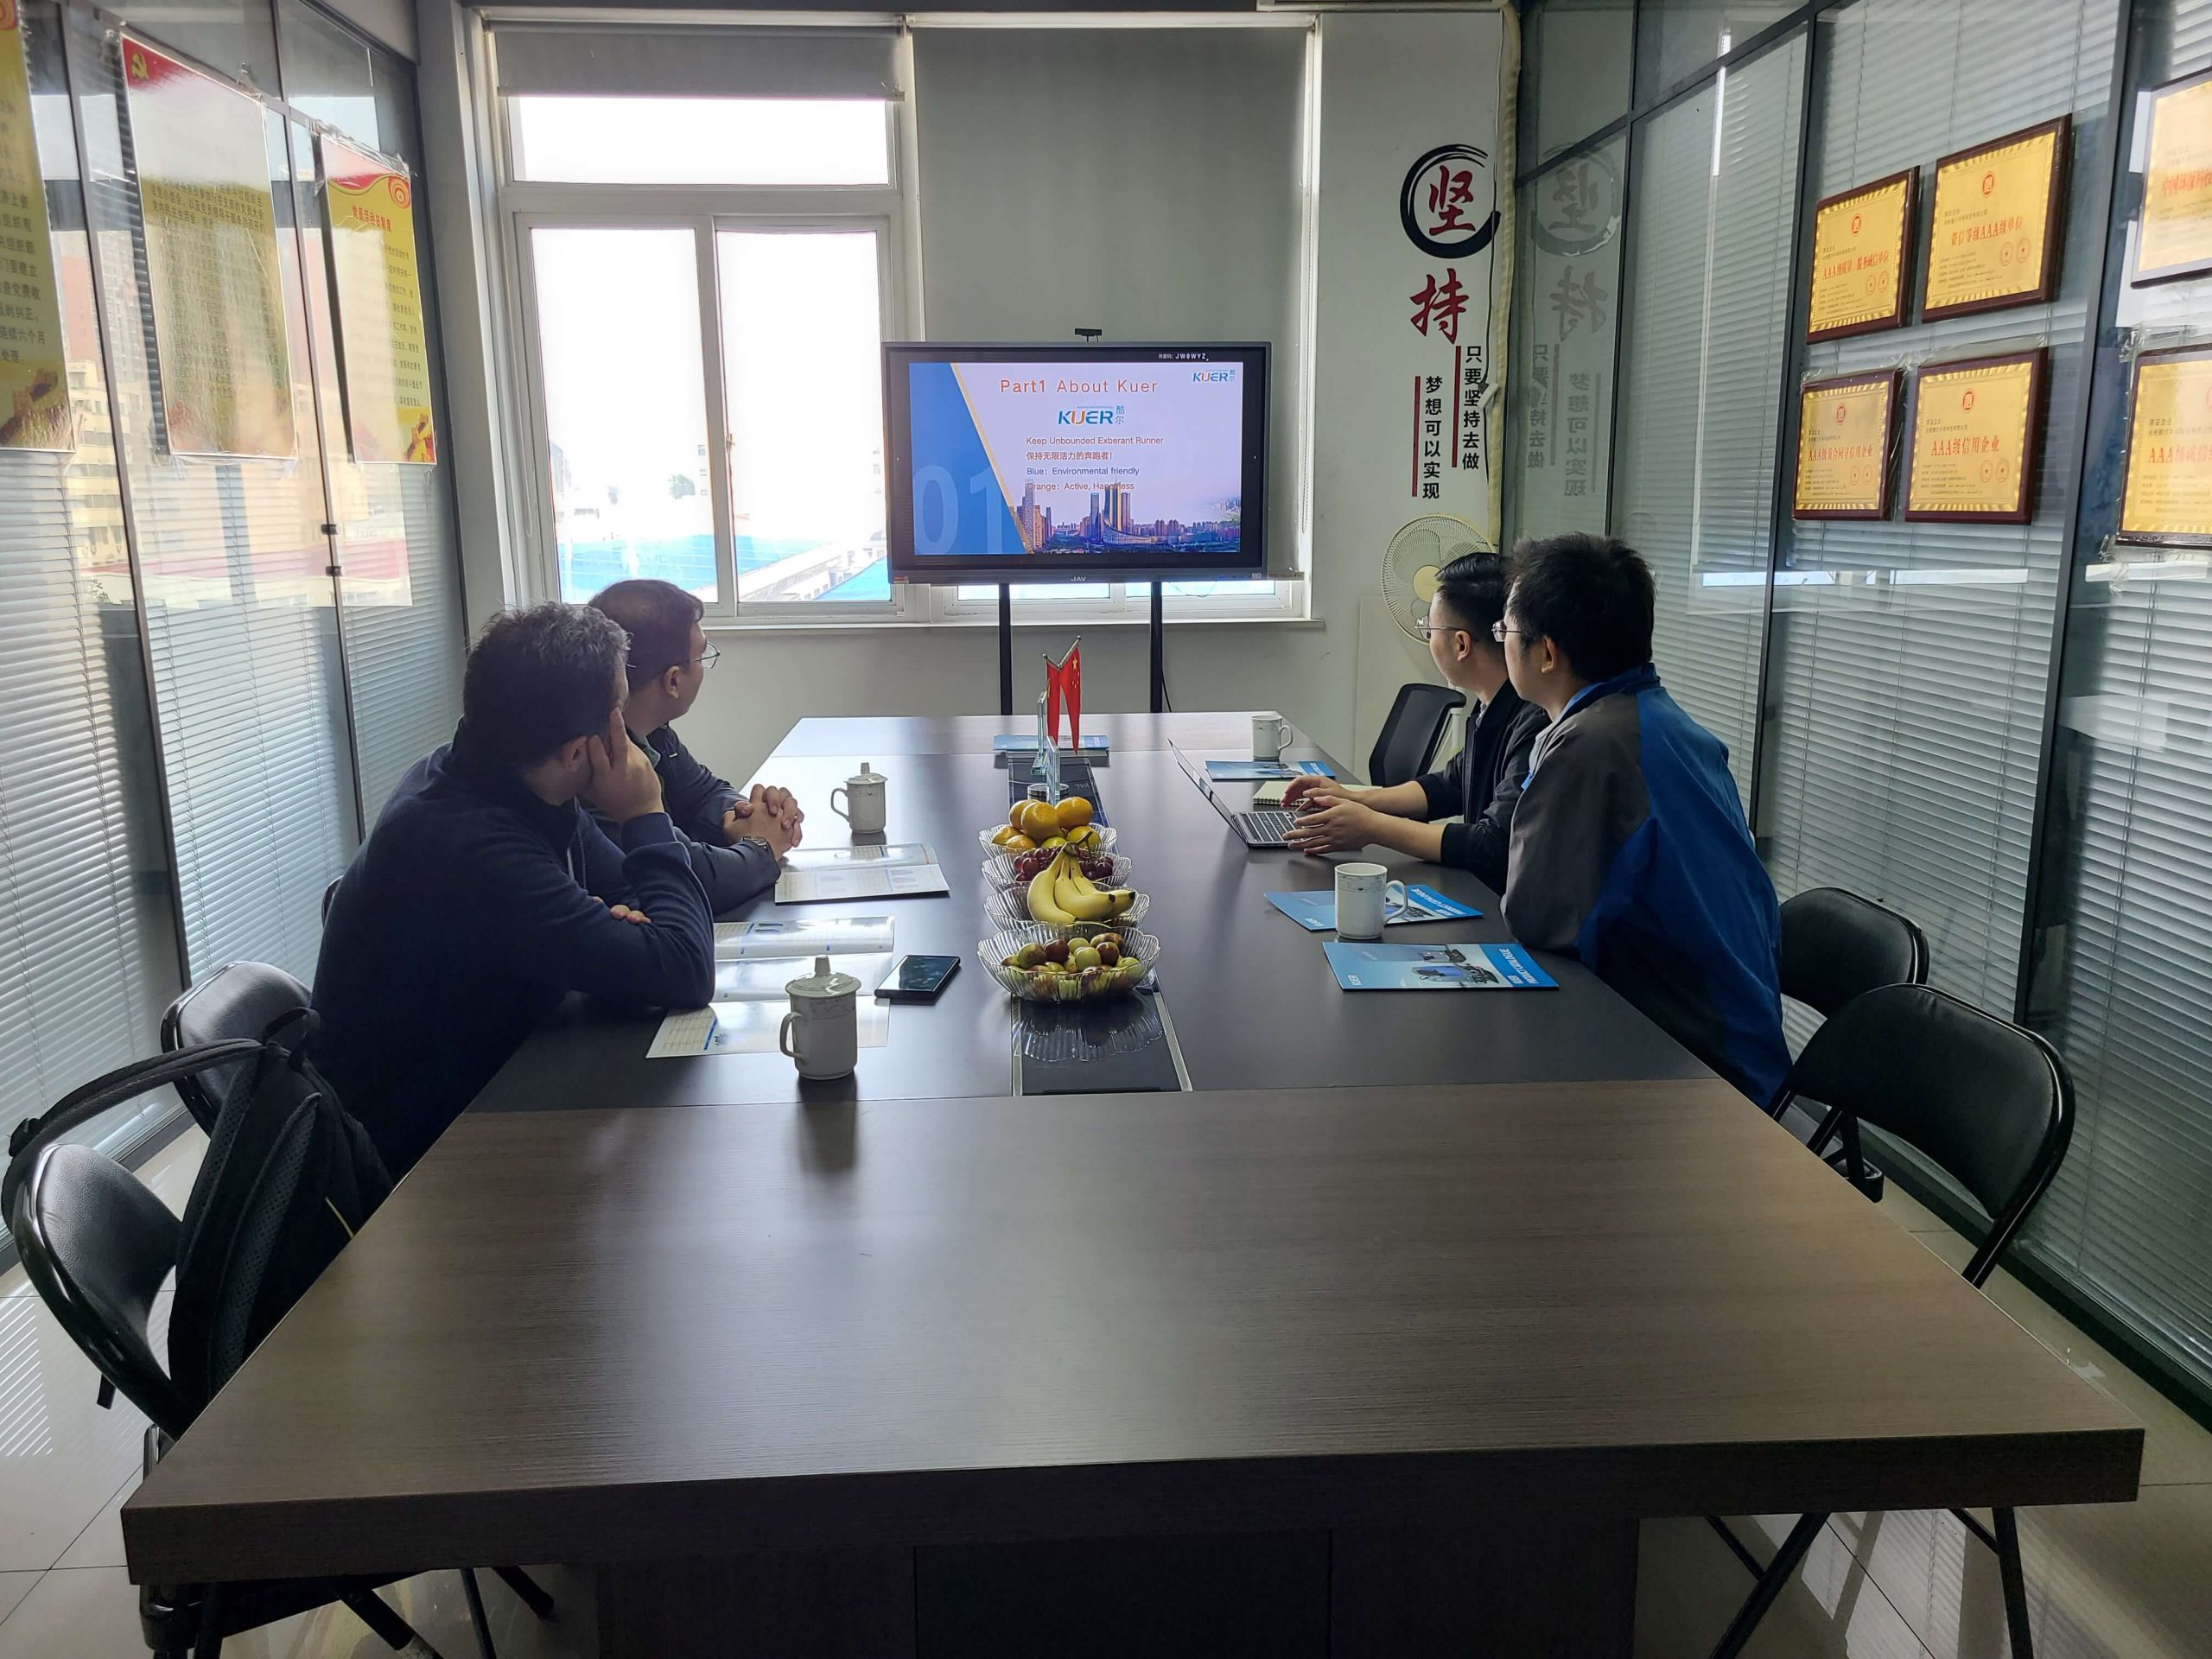 German Kärcher conducted a visit to Hefei KUER company to explore the floor cleaning machine product